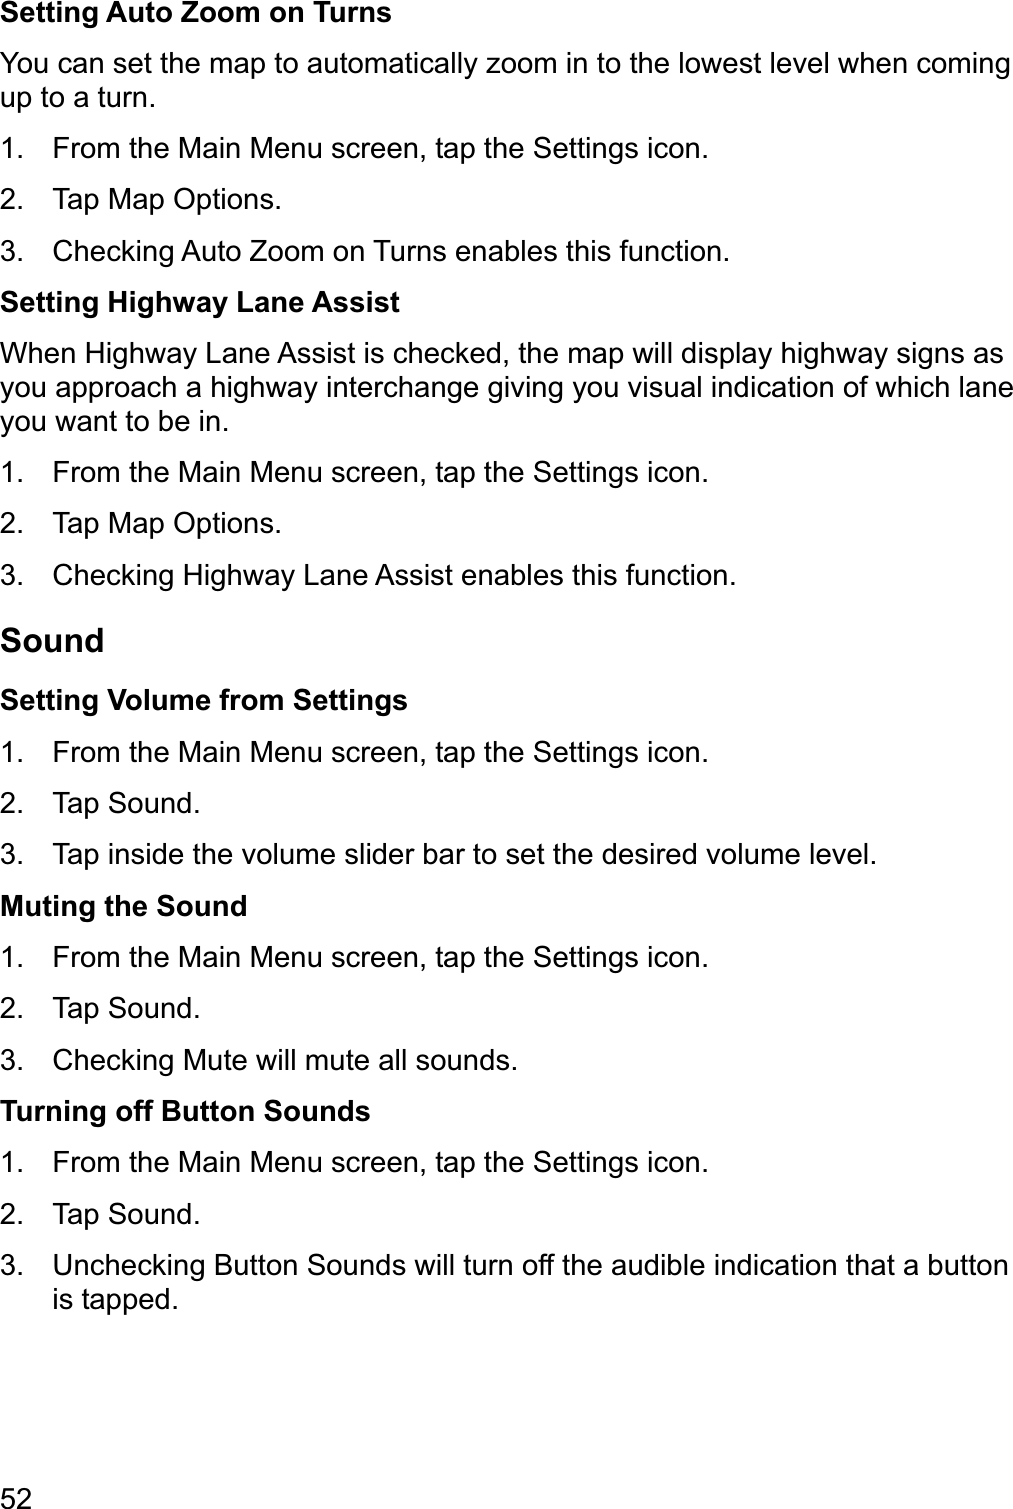 52Setting Auto Zoom on Turns You can set the map to automatically zoom in to the lowest level when coming up to a turn. 1.  From the Main Menu screen, tap the Settings icon. 2.  Tap Map Options. 3.  Checking Auto Zoom on Turns enables this function. Setting Highway Lane Assist When Highway Lane Assist is checked, the map will display highway signs as you approach a highway interchange giving you visual indication of which lane you want to be in. 1.  From the Main Menu screen, tap the Settings icon. 2.  Tap Map Options. 3. Checking Highway Lane Assist enables this function. SoundSetting Volume from Settings 1.  From the Main Menu screen, tap the Settings icon. 2. Tap Sound. 3.  Tap inside the volume slider bar to set the desired volume level. Muting the Sound 1.  From the Main Menu screen, tap the Settings icon. 2. Tap Sound. 3.  Checking Mute will mute all sounds. Turning off Button Sounds 1.  From the Main Menu screen, tap the Settings icon. 2. Tap Sound. 3.  Unchecking Button Sounds will turn off the audible indication that a button is tapped. 